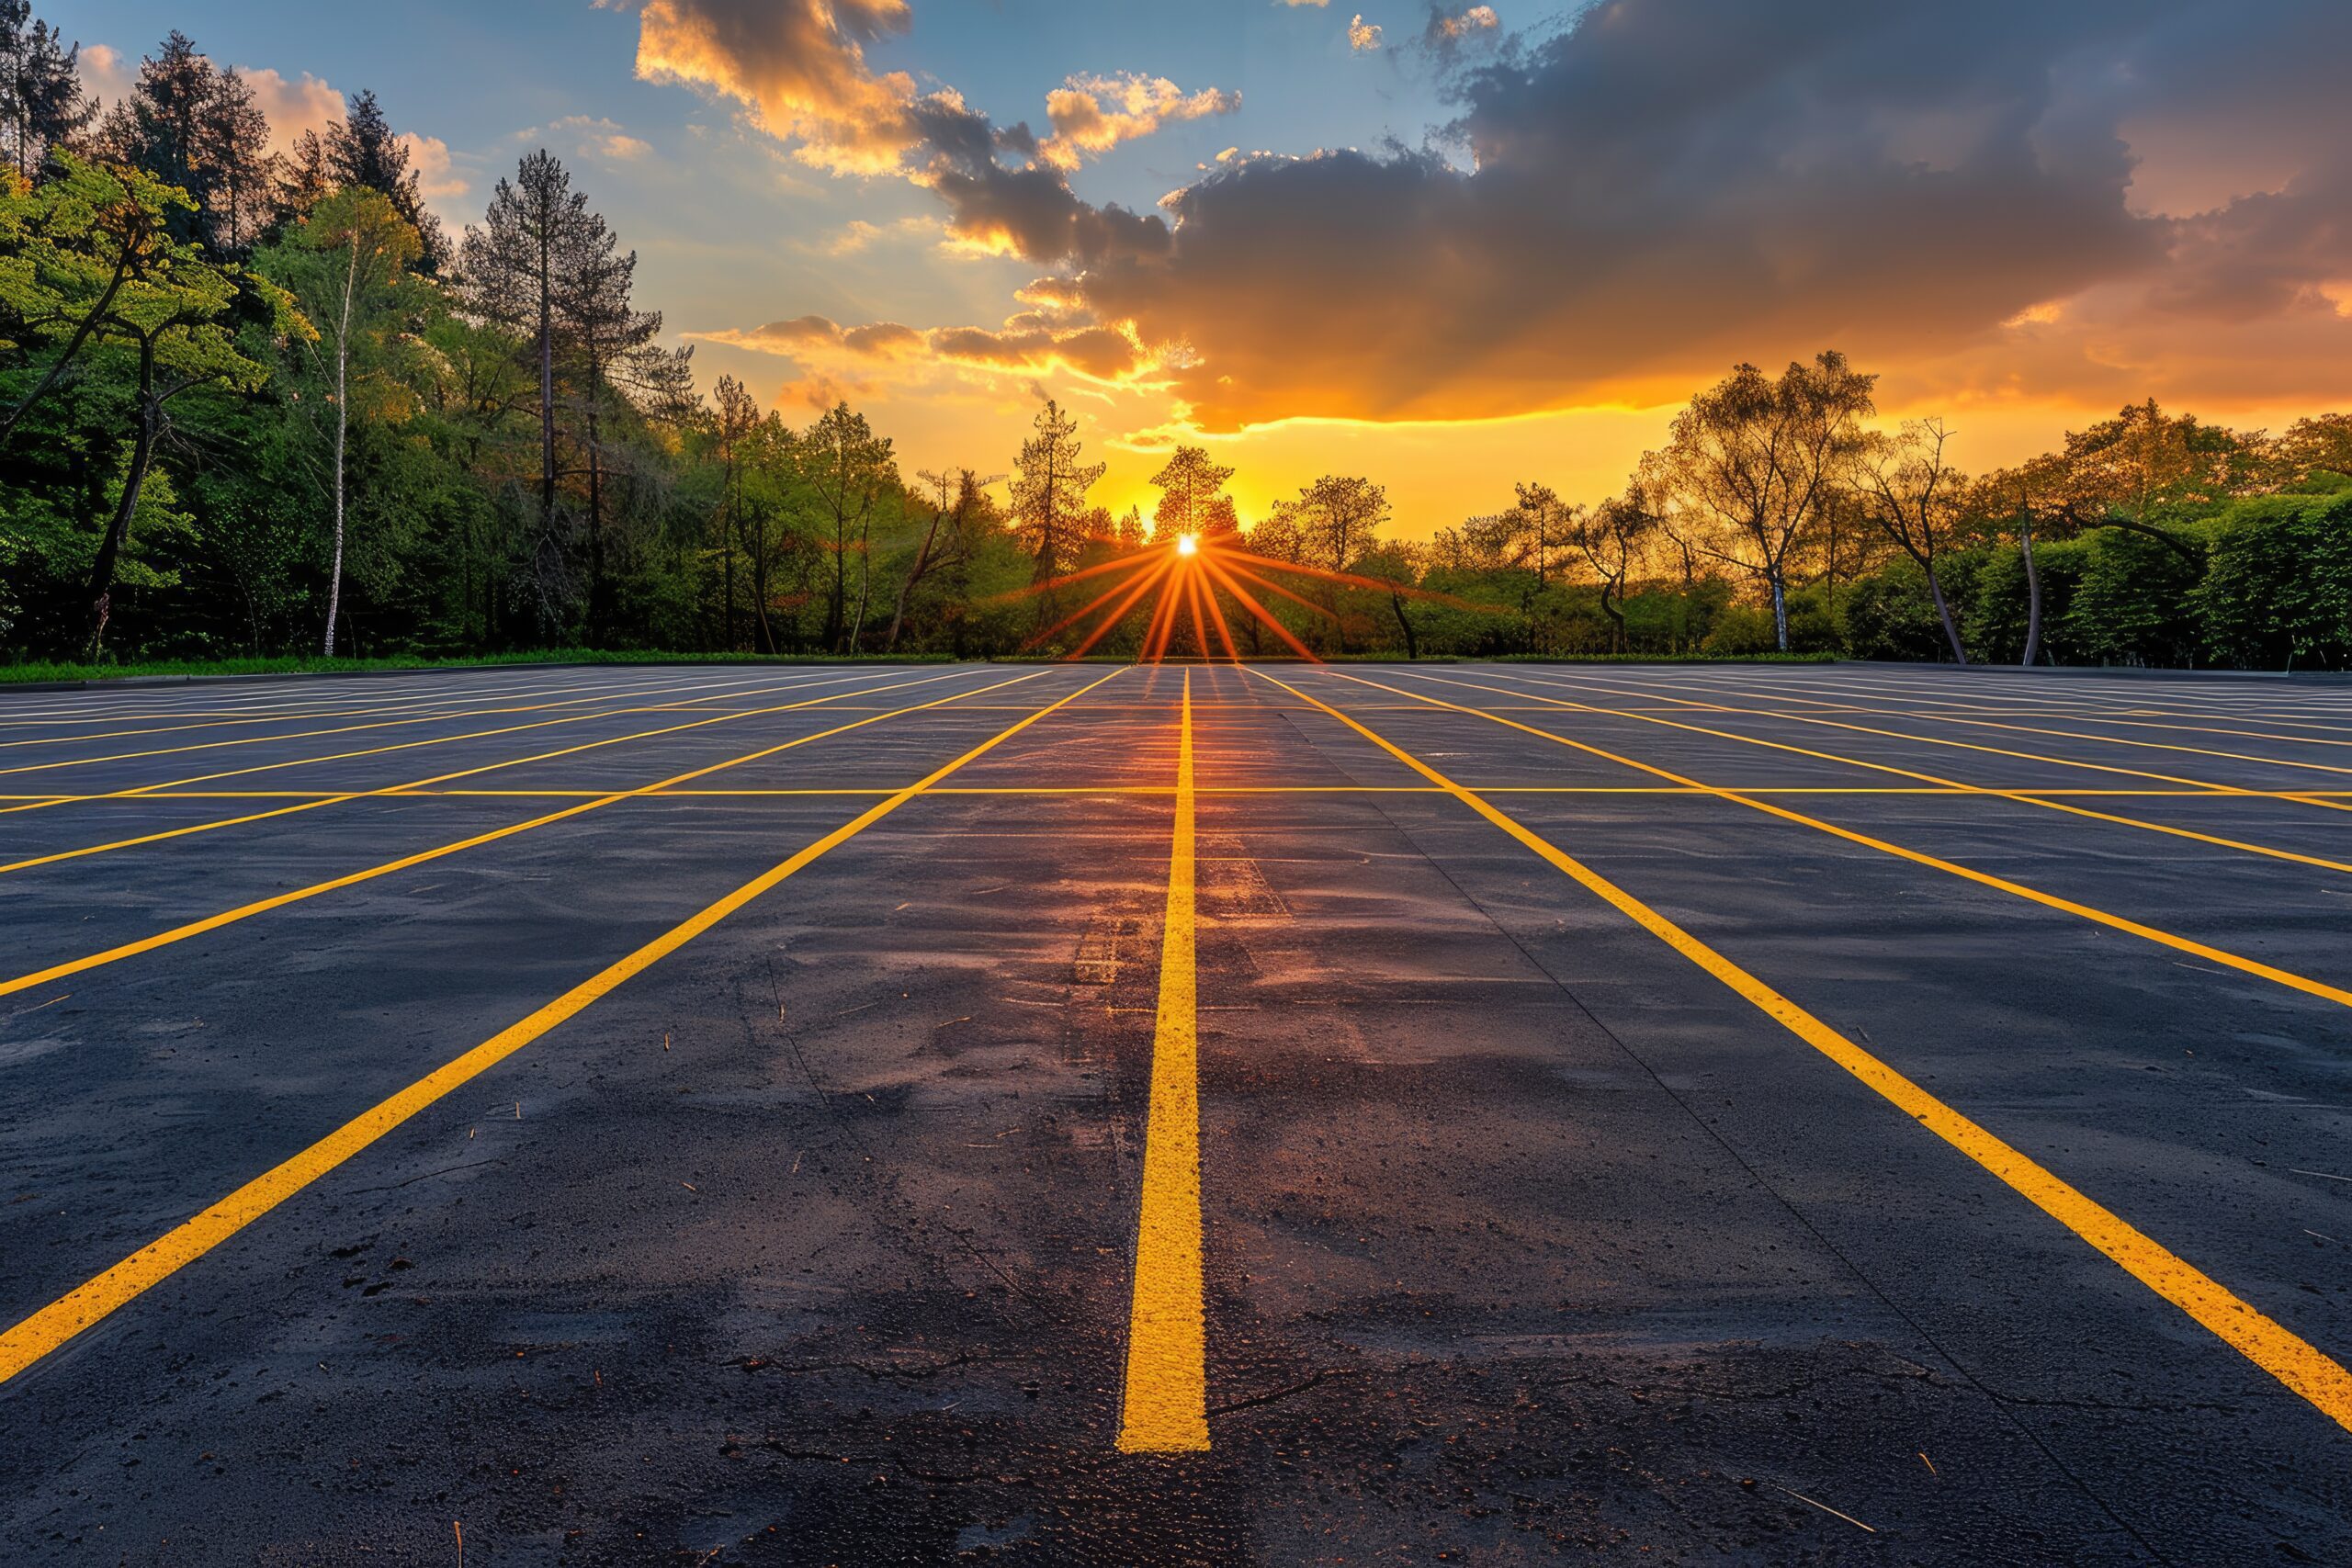 Parking Lot Line Painting by LandSharx Commercial Property Maintenance Services